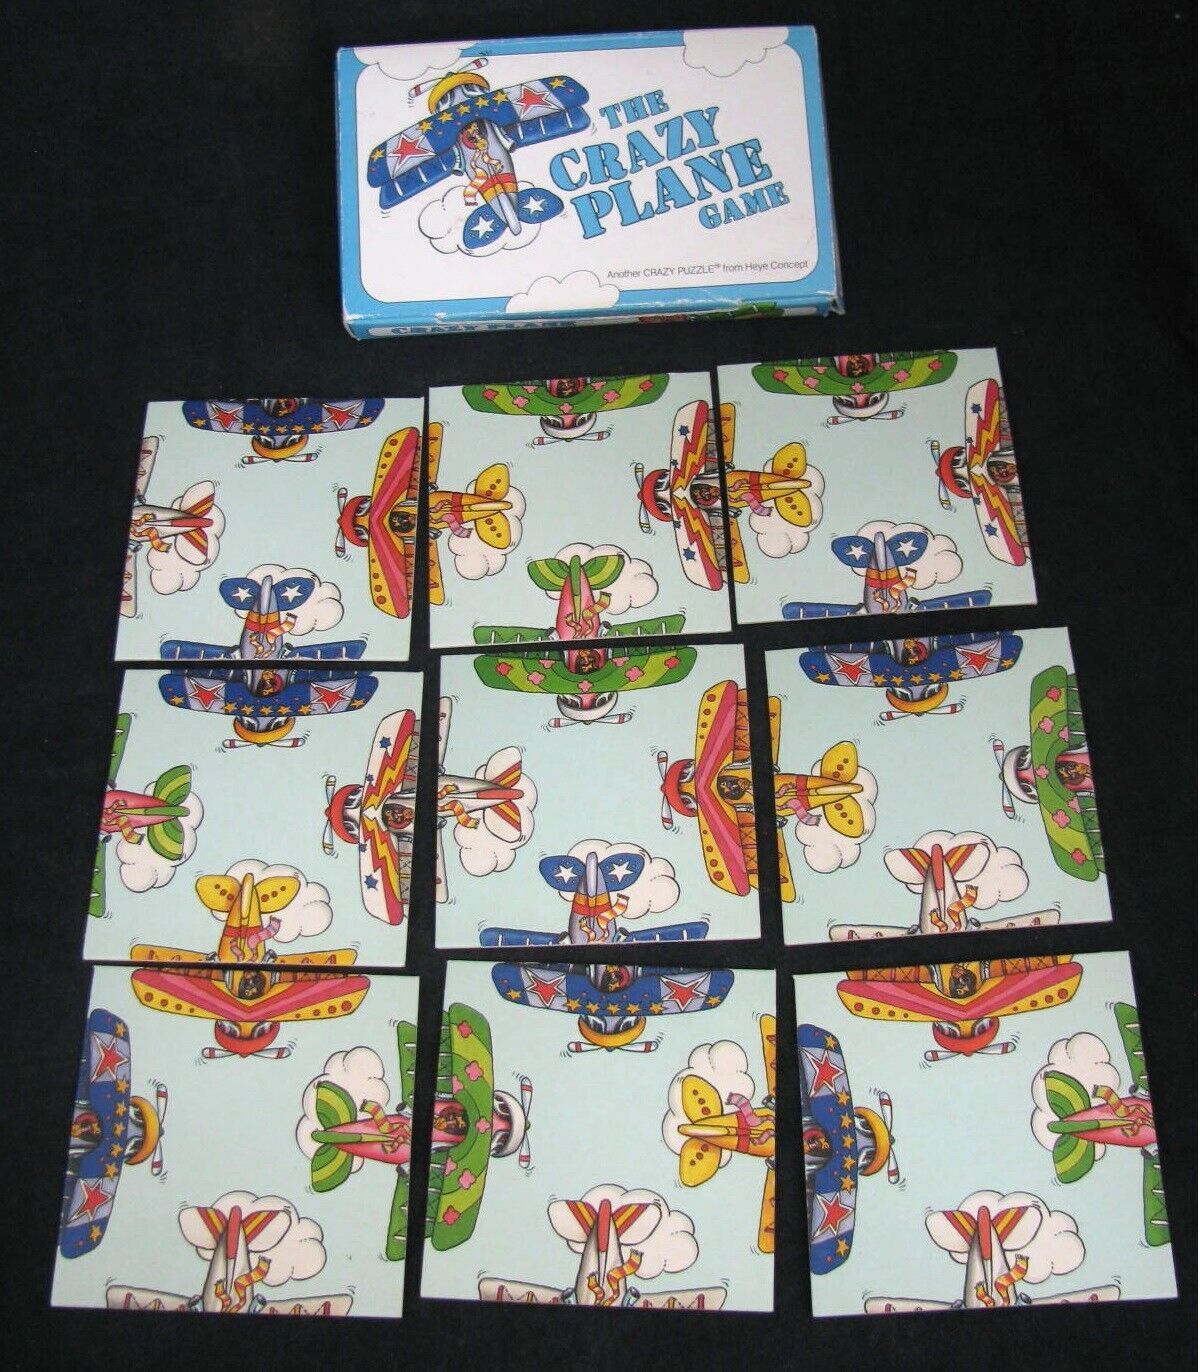 Vintage The Crazy Plane Game Picture Card Puzzle Artus Games 1980 Heye Concept - $11.87